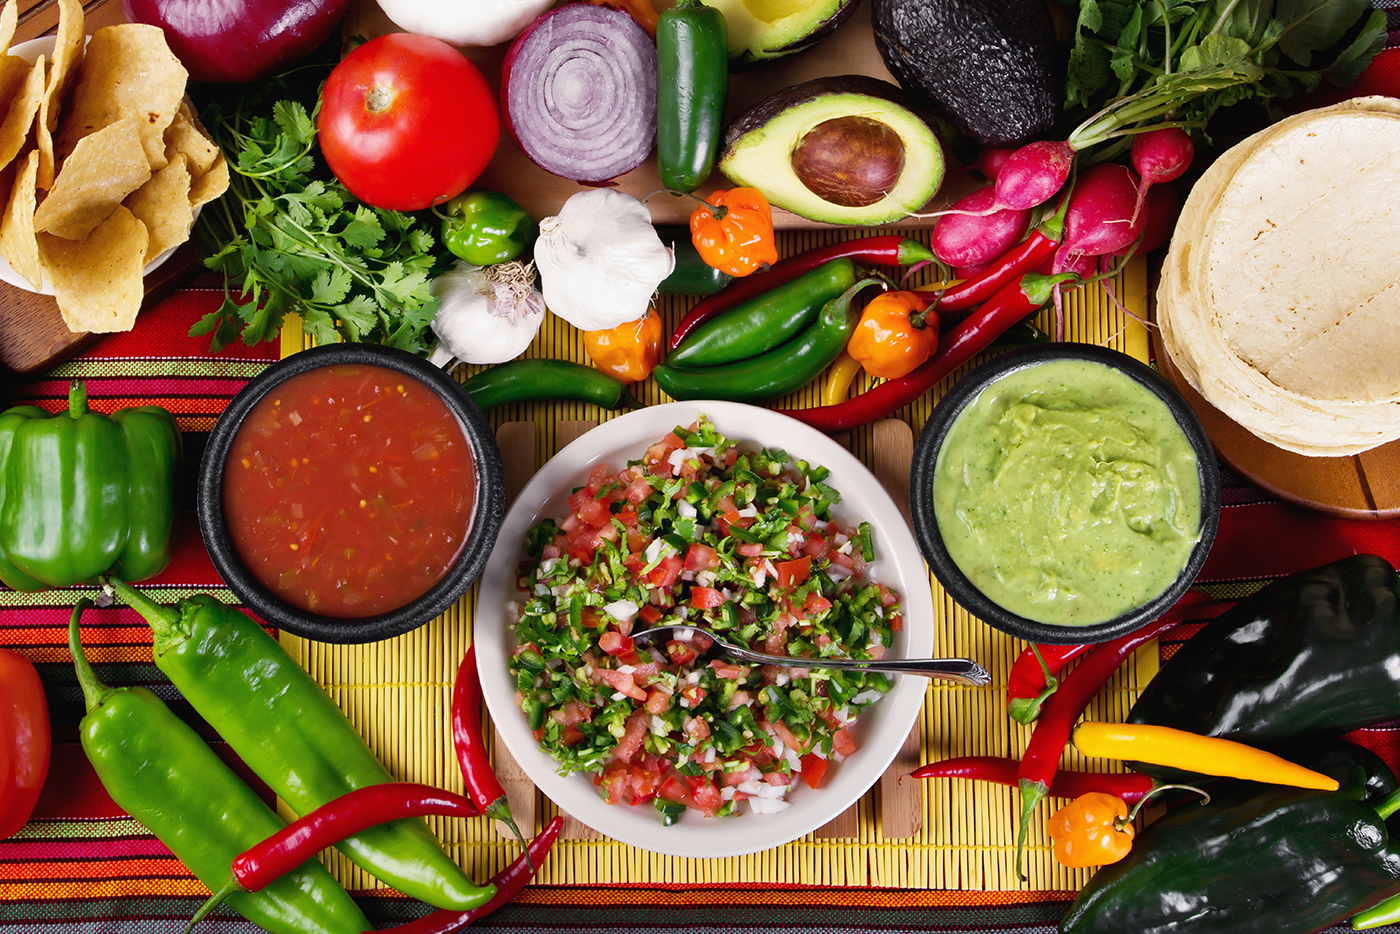 Image showing ingredients of a Mexican Salsa